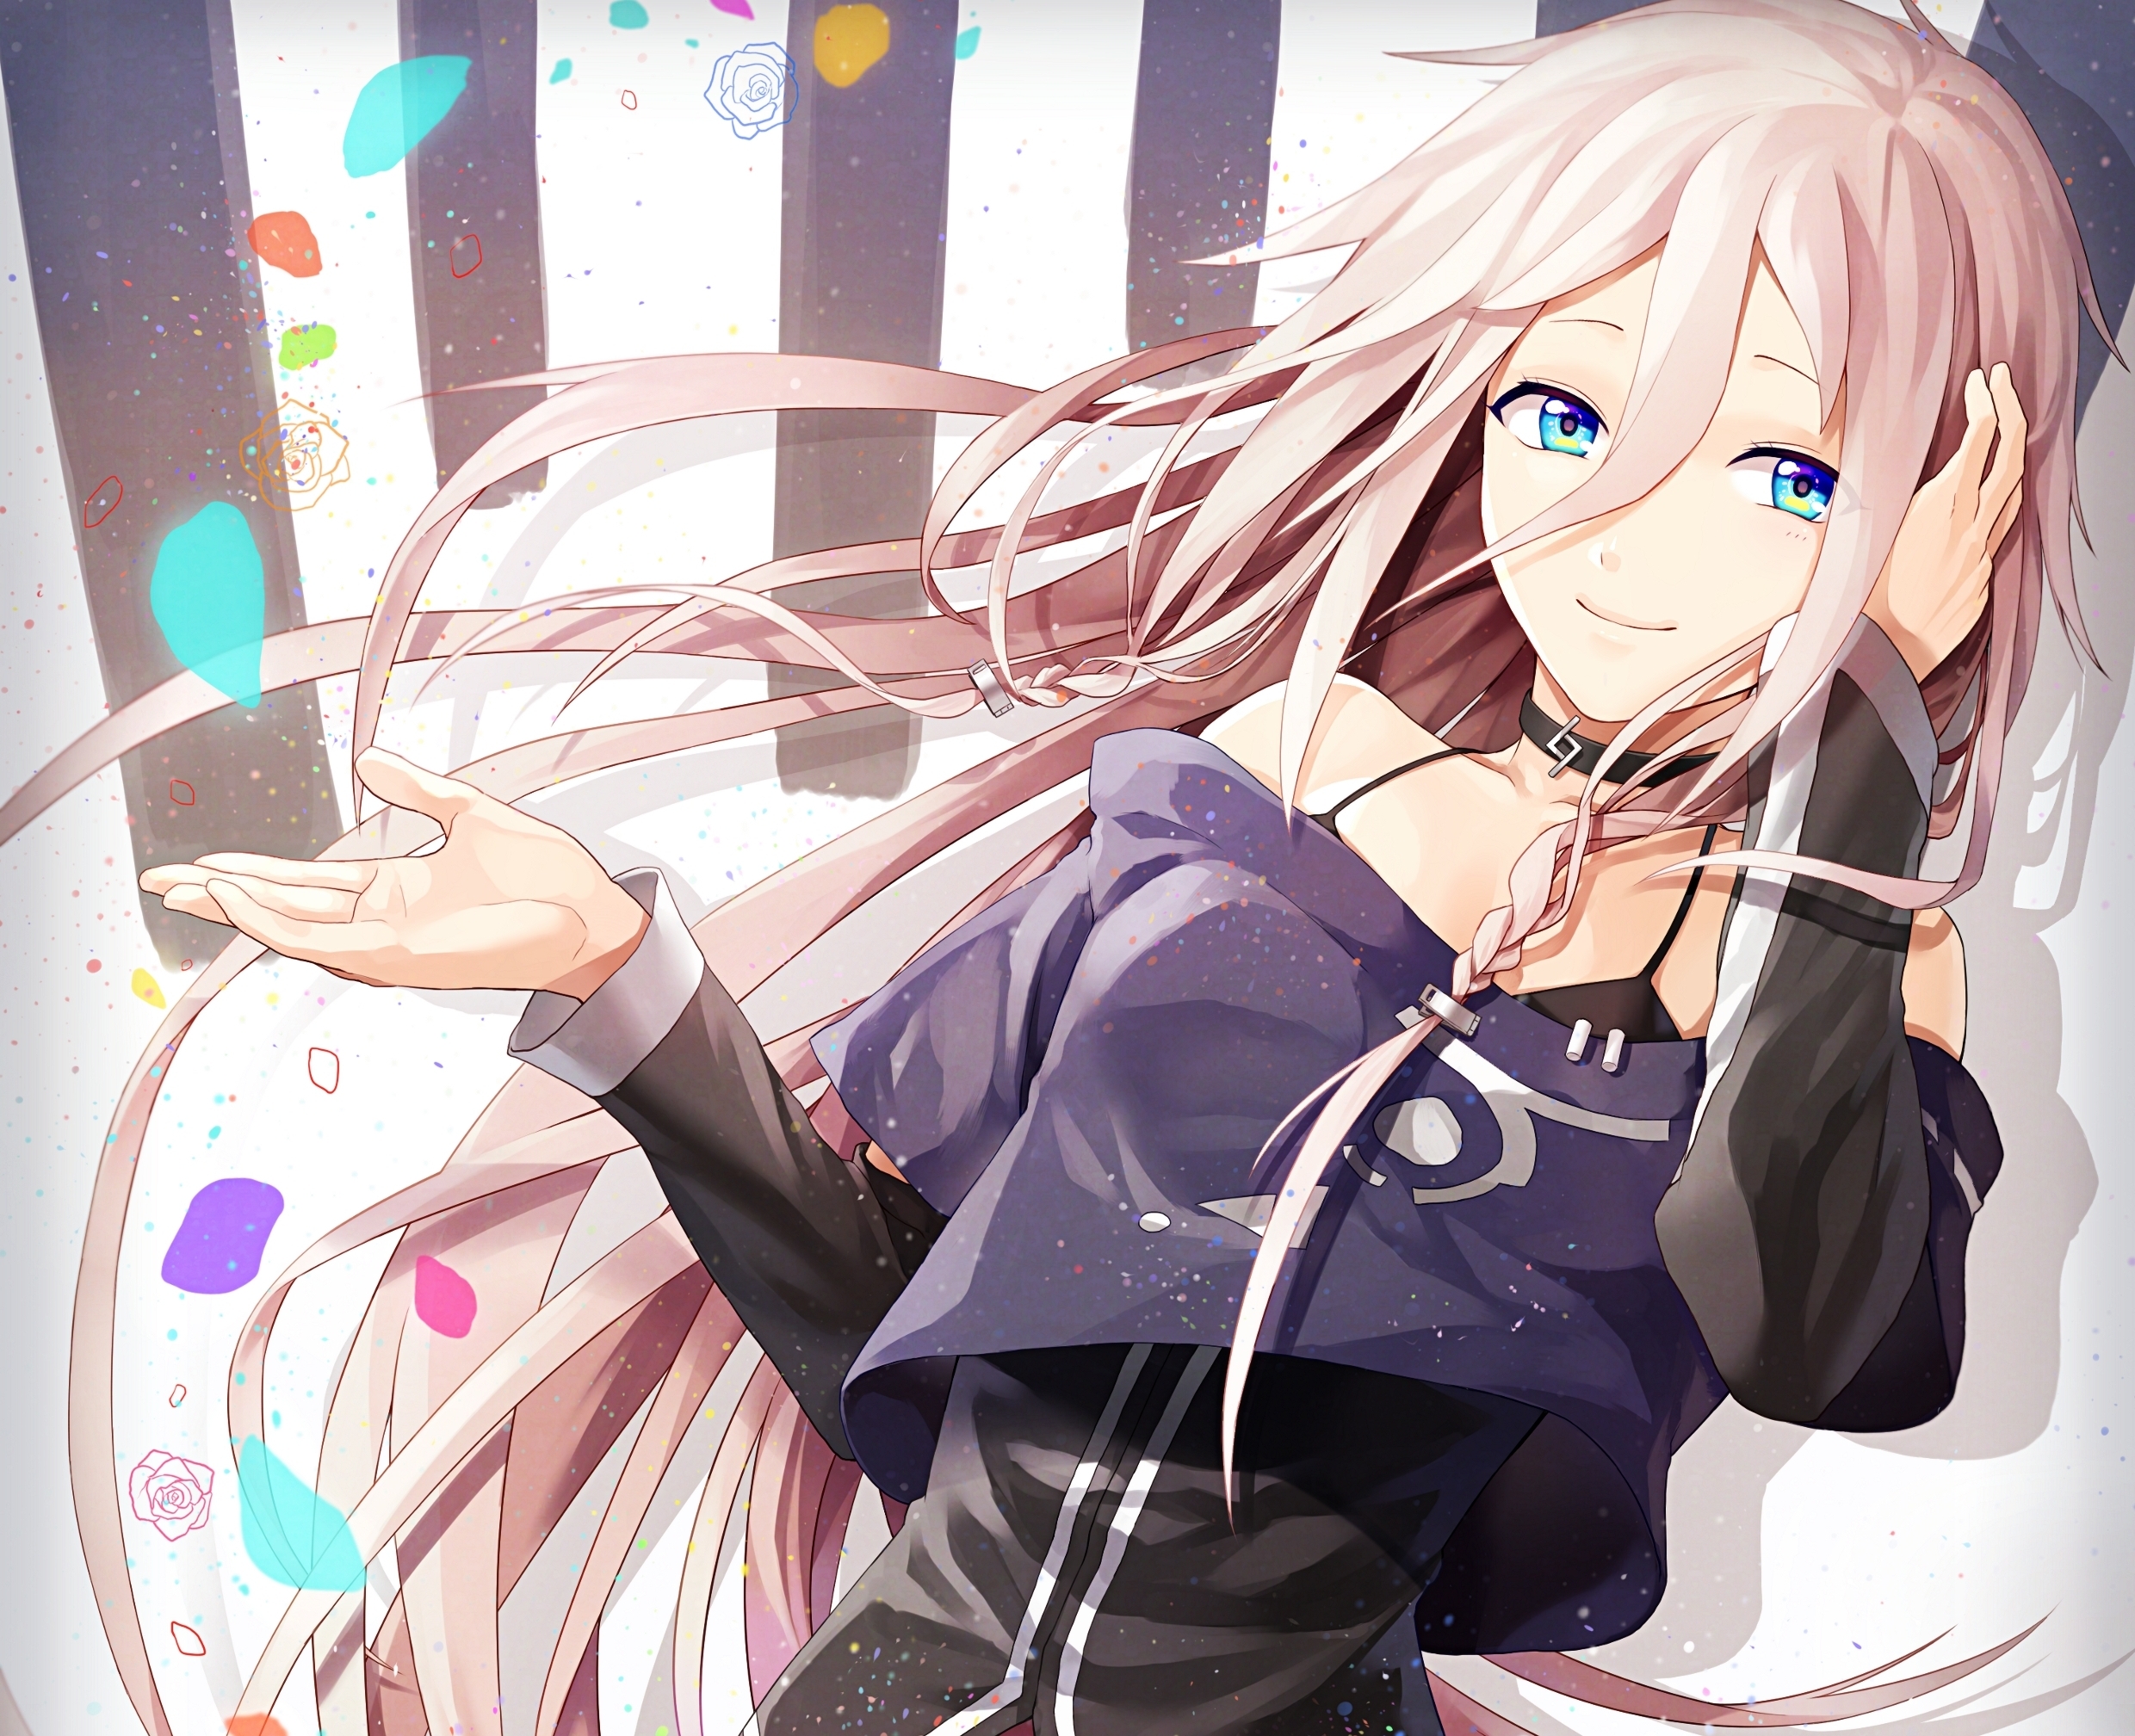 Vocaloid Ia Girl Wallpaper Hd Anime 4k Wallpapers Images Photos And Background Wallpapers Den